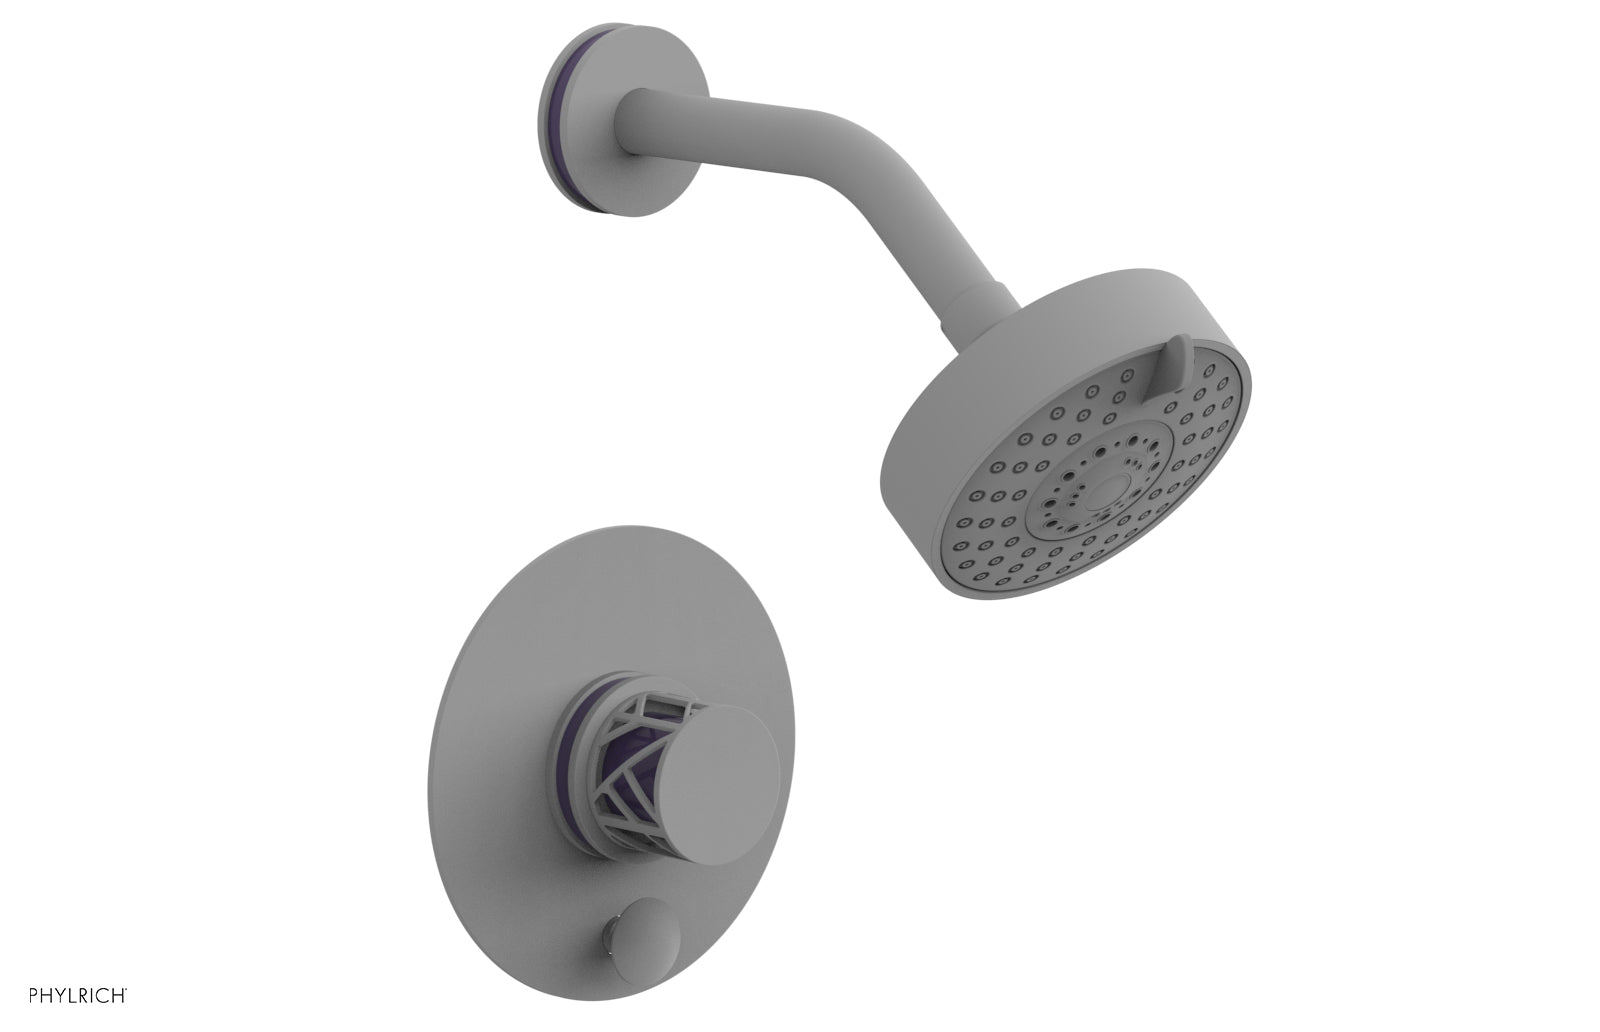 Phylrich JOLIE Pressure Balance Shower and Diverter Set (Less Spout), Round Handle with "Purple" Accents